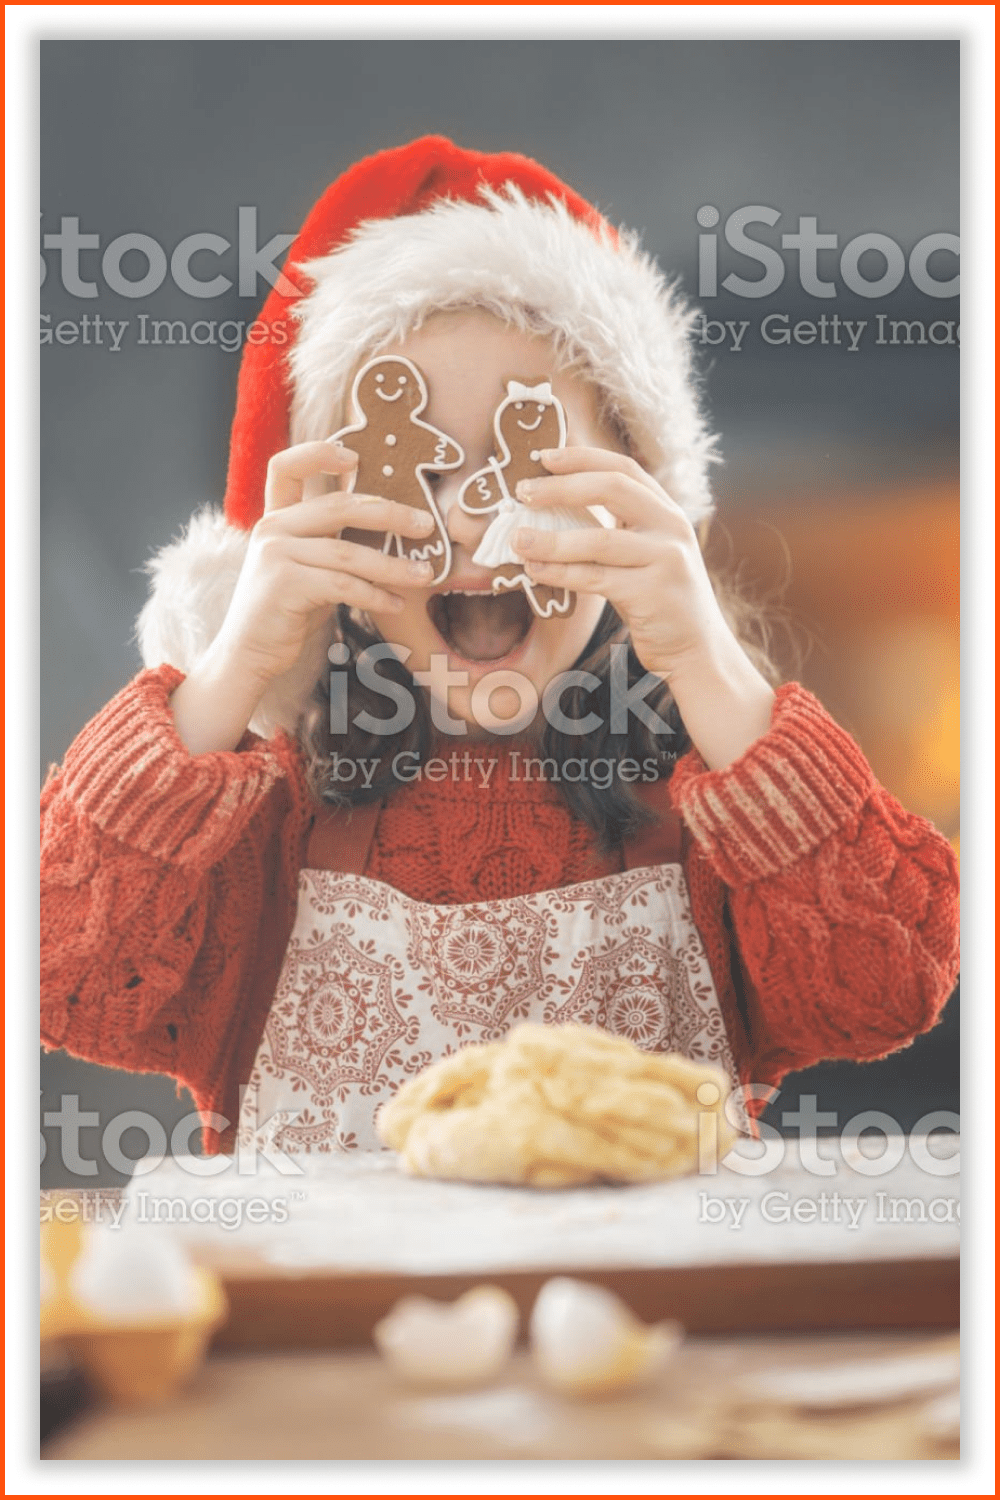 A little girl in a Santa hat with freshly baked gingerbreads.